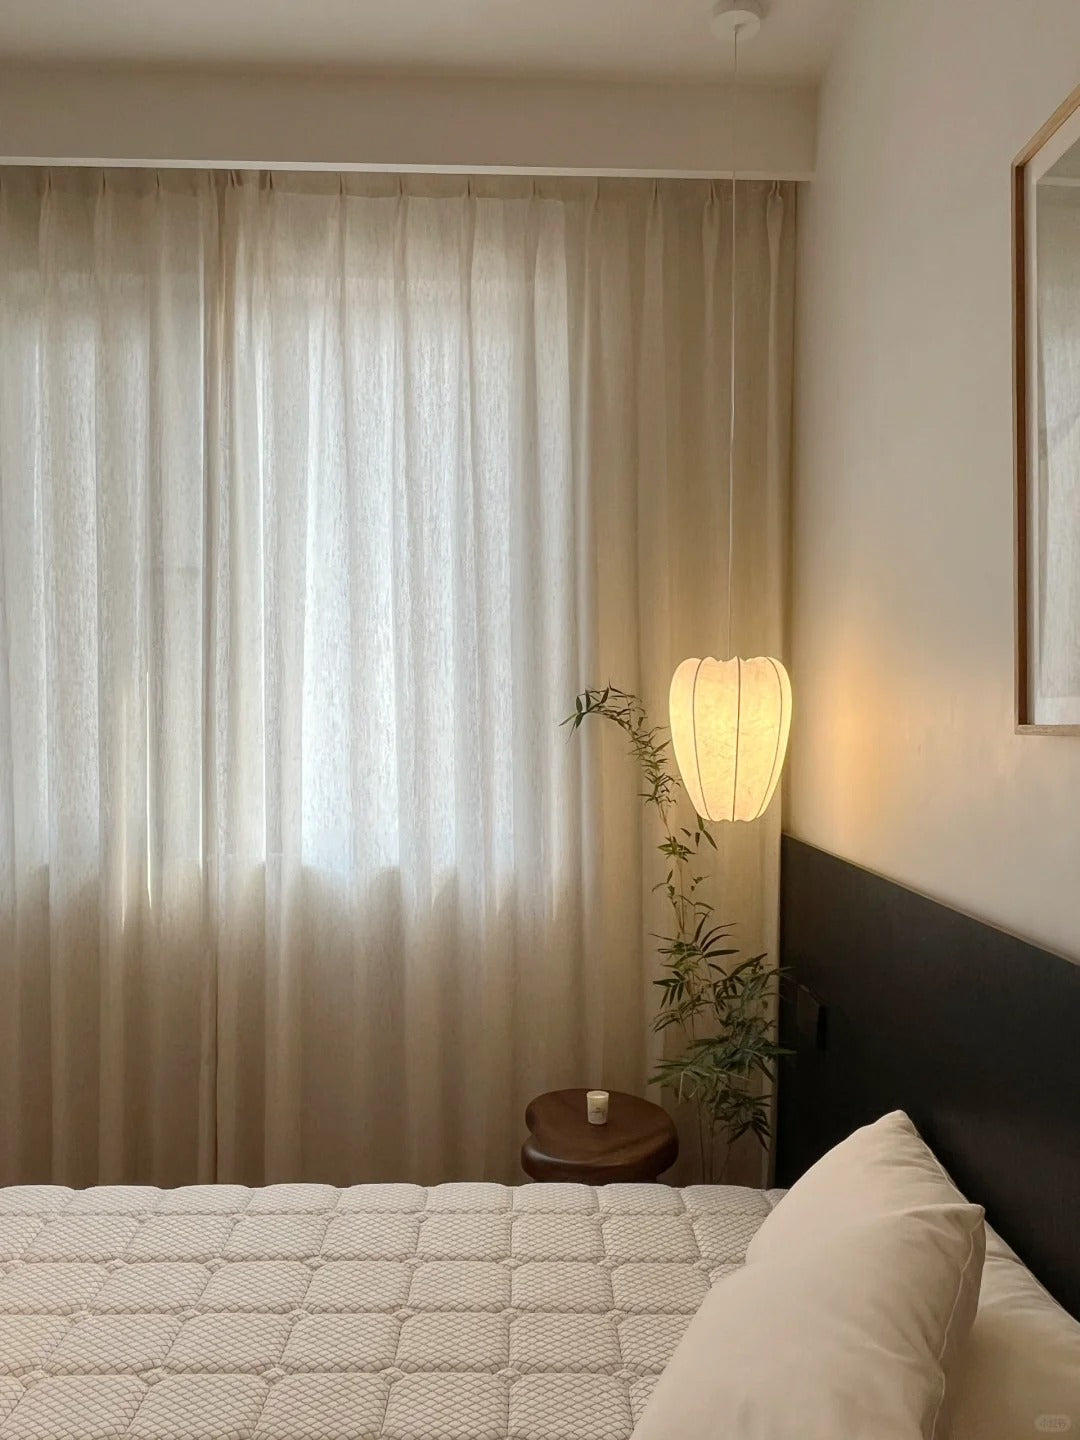 Luxurious linen-wool blend sheer curtain in a bedroom setting with soft ambient lighting and minimalist decor, enhancing privacy and natural light